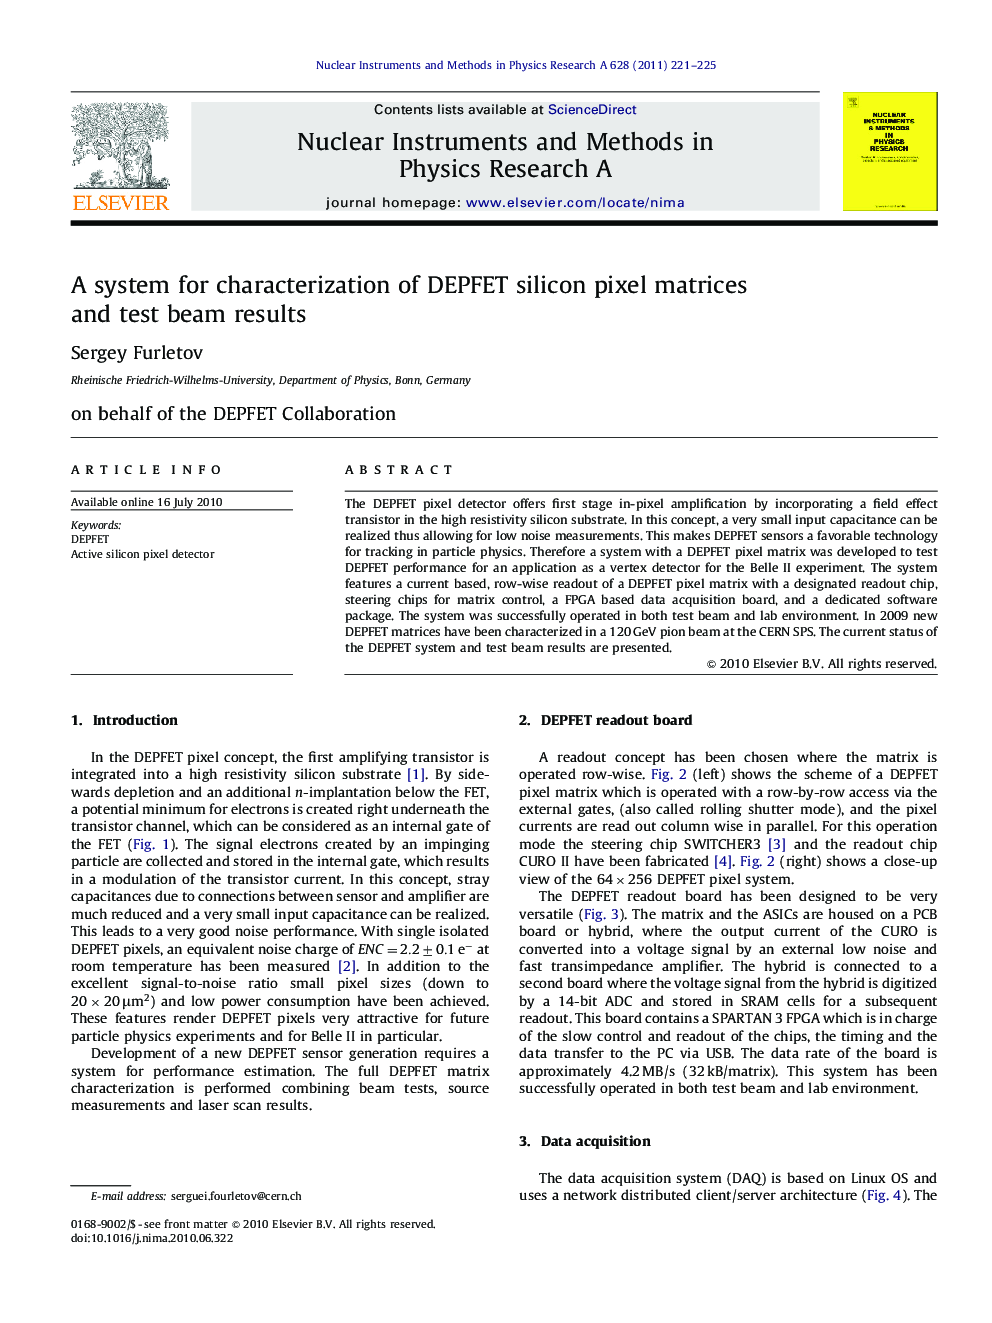 A system for characterization of DEPFET silicon pixel matrices and test beam results